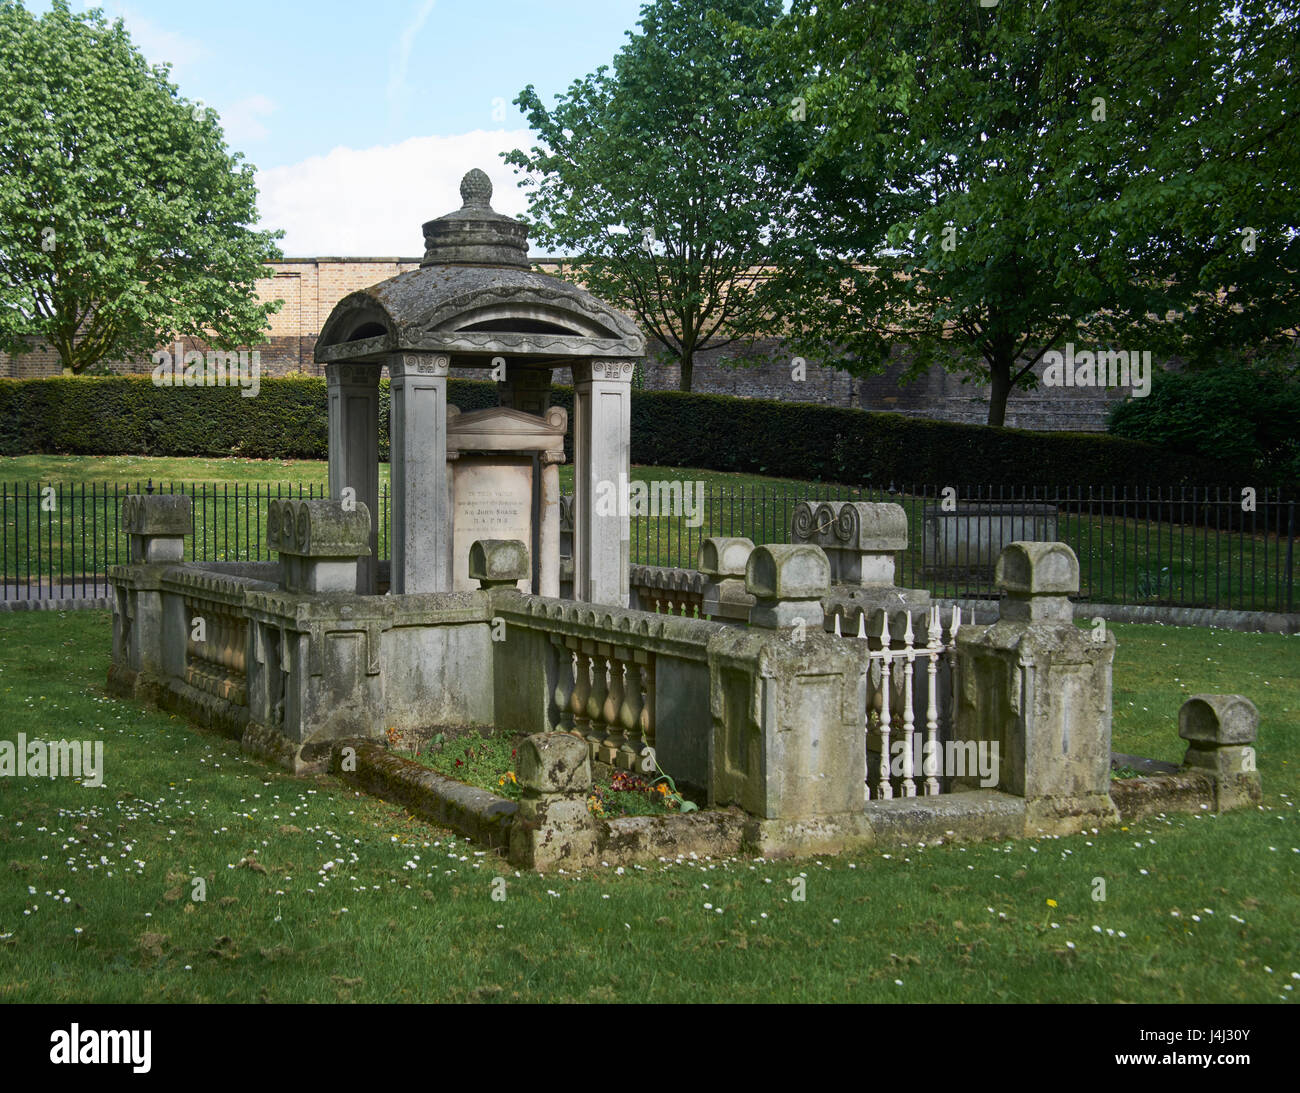 St Pancras Old Church, London. Neo-classical tomb of architect Sir John Soane, designed by him for his wife (died 1815) and himself in the churchyard. Stock Photo